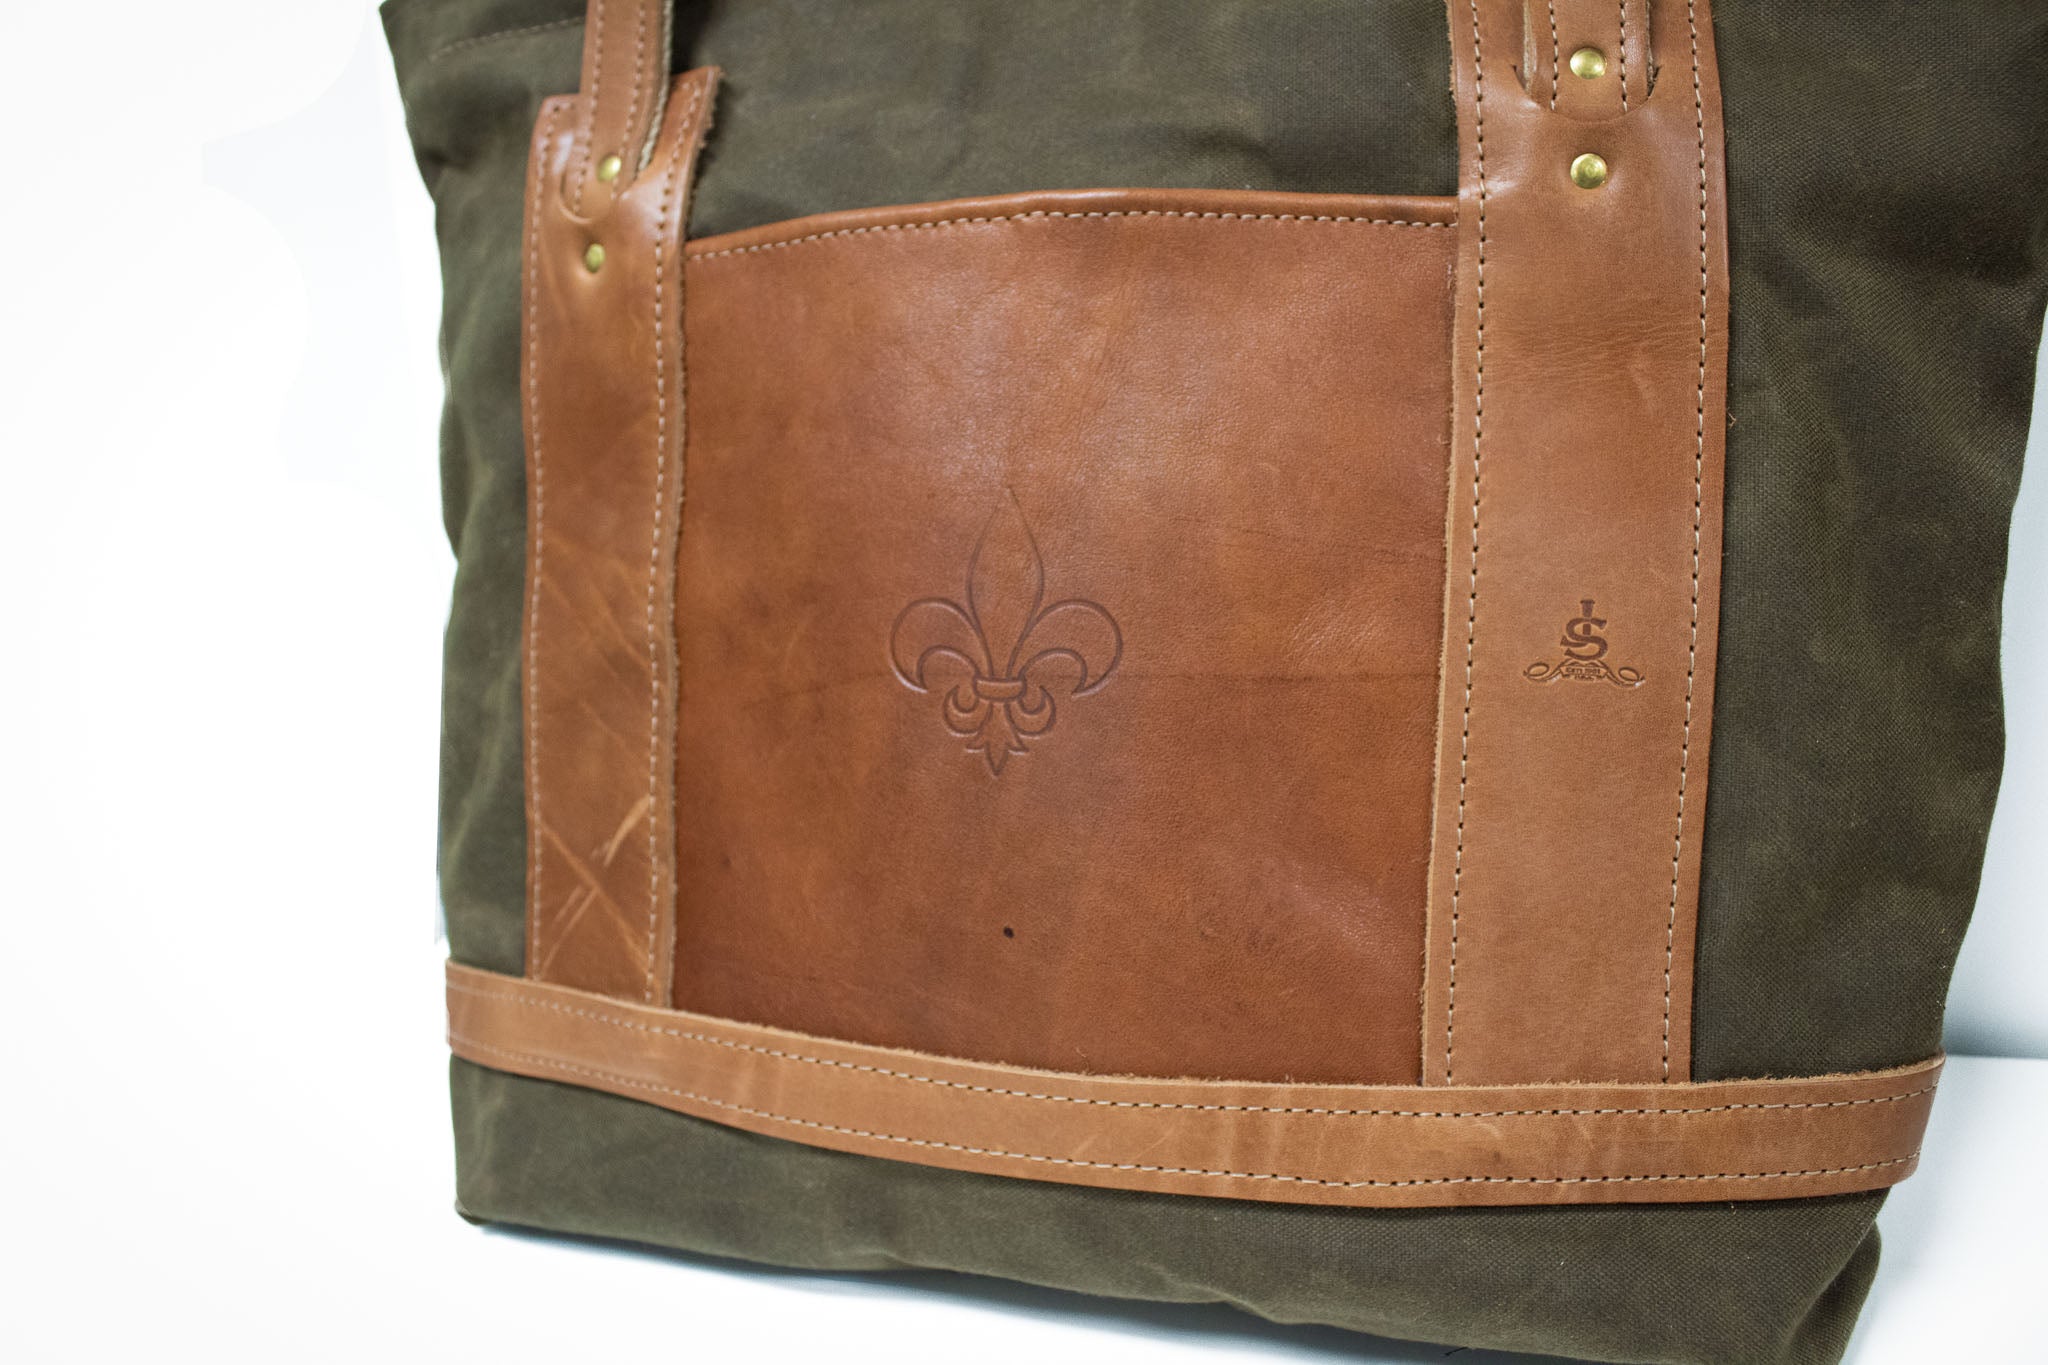 Market Canvas Leather  Leather Bags, Handcrafted Bags